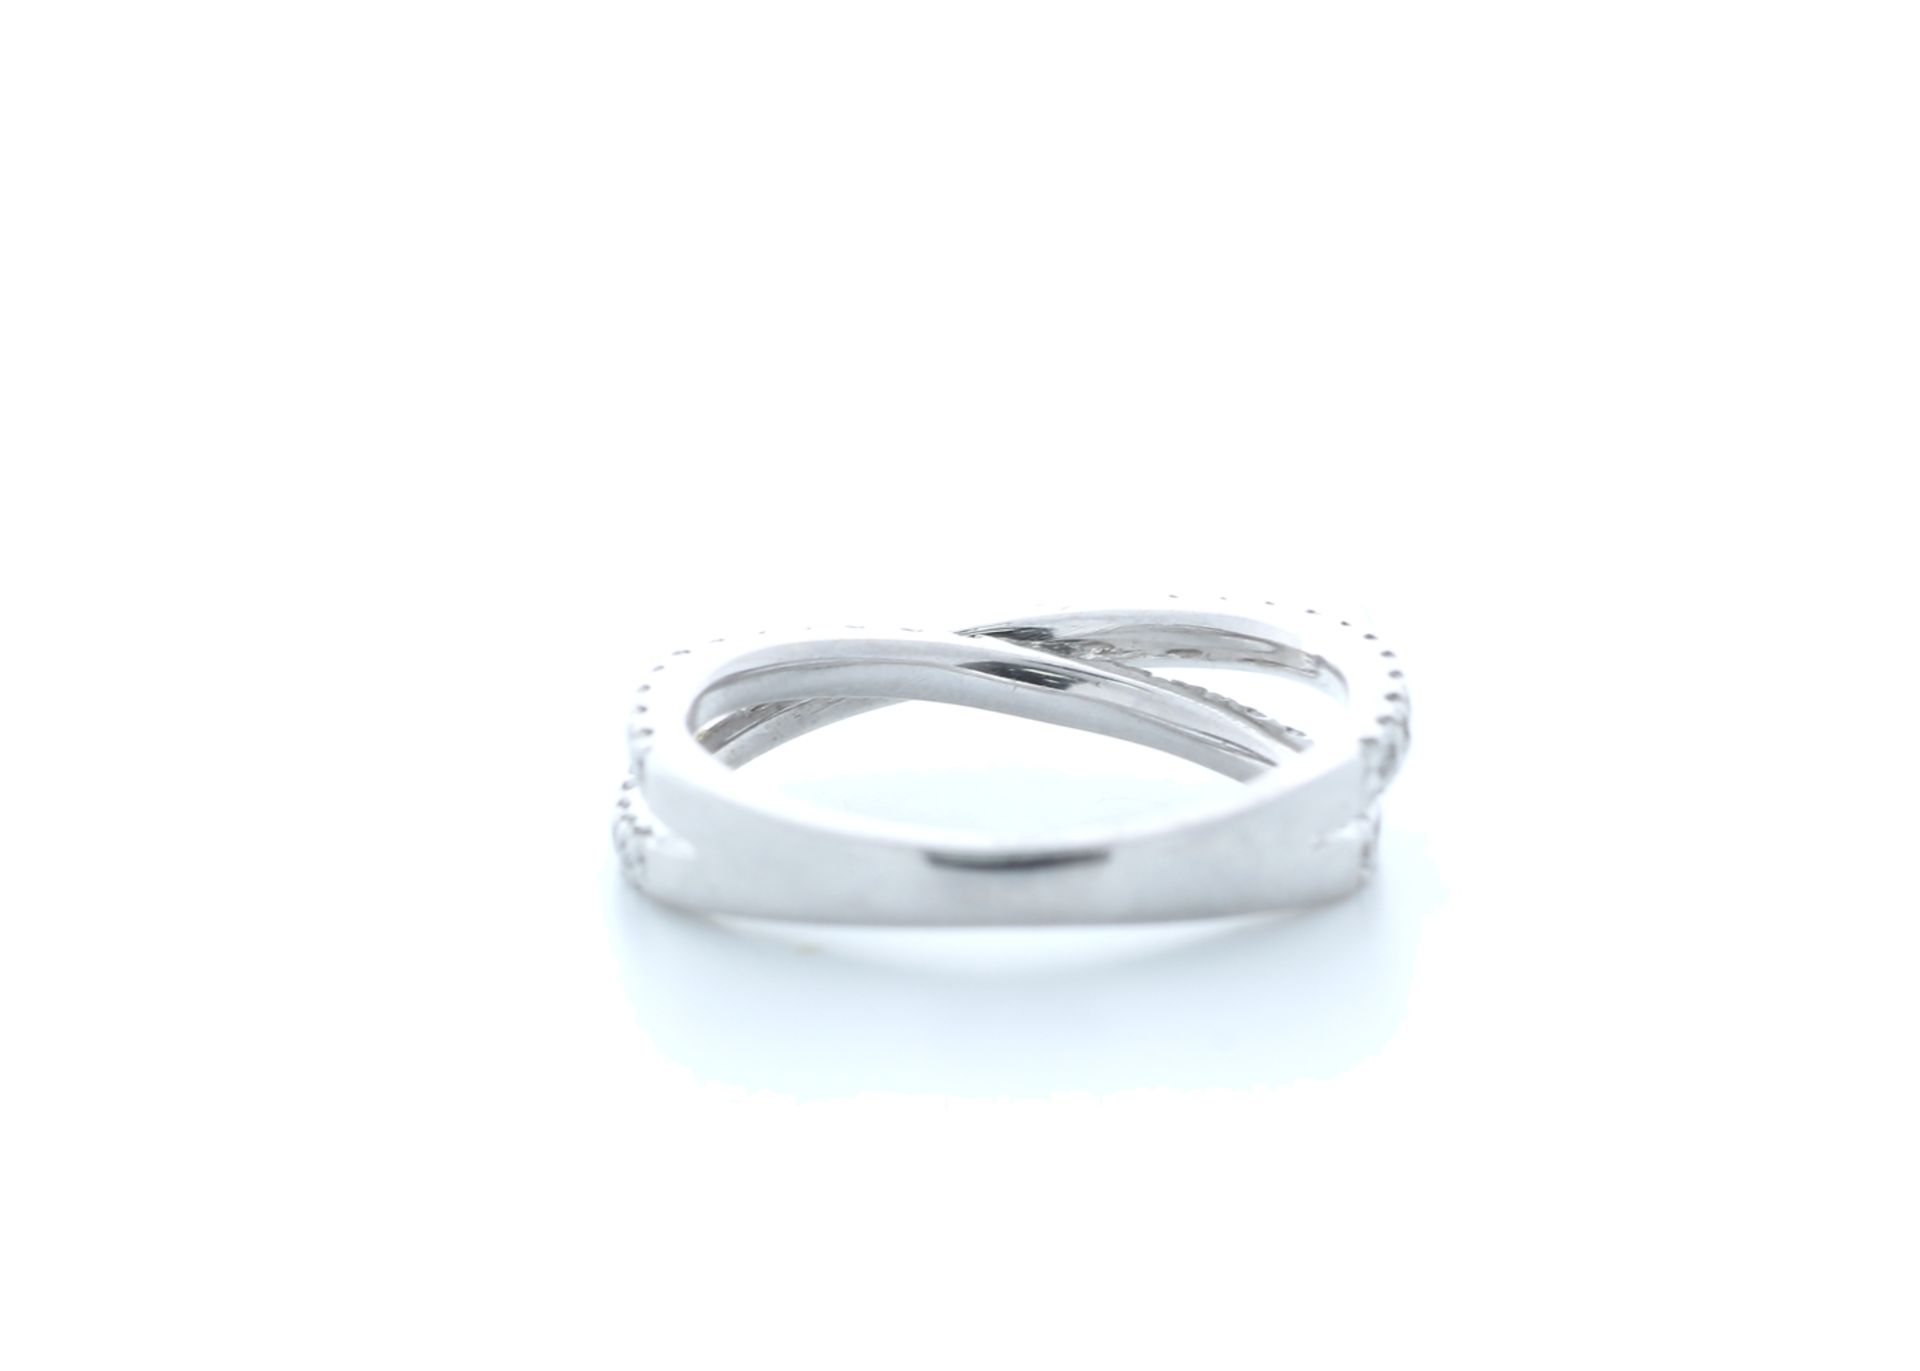 18ct White Gold Claw Set Semi Eternity Diamond Ring 0.73 Carats - Valued by IDI £4,950.00 - 18ct - Image 3 of 5